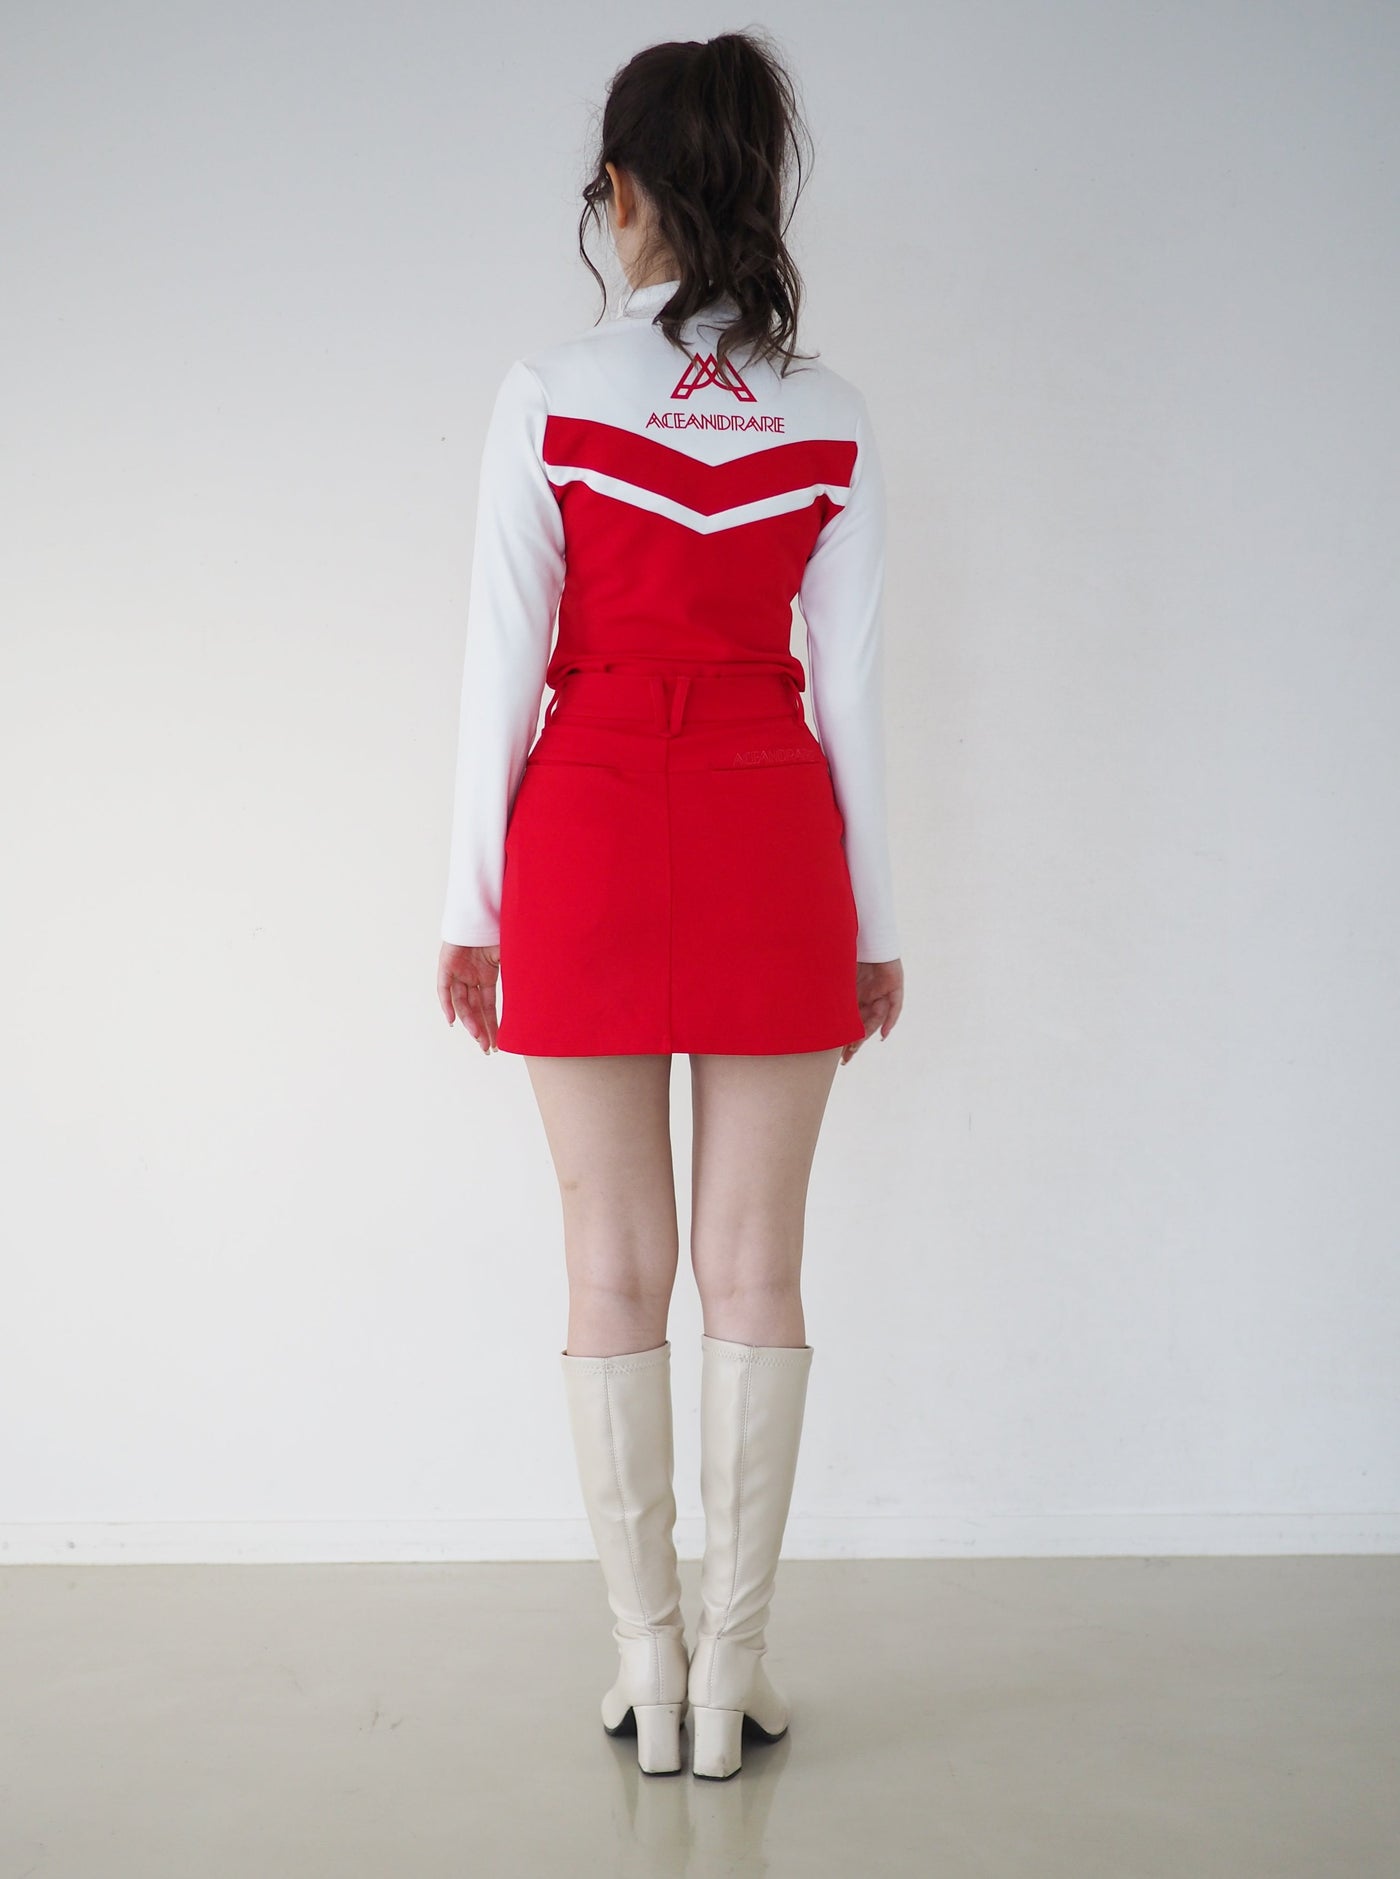 ACE TIGHT SKIRT / RED